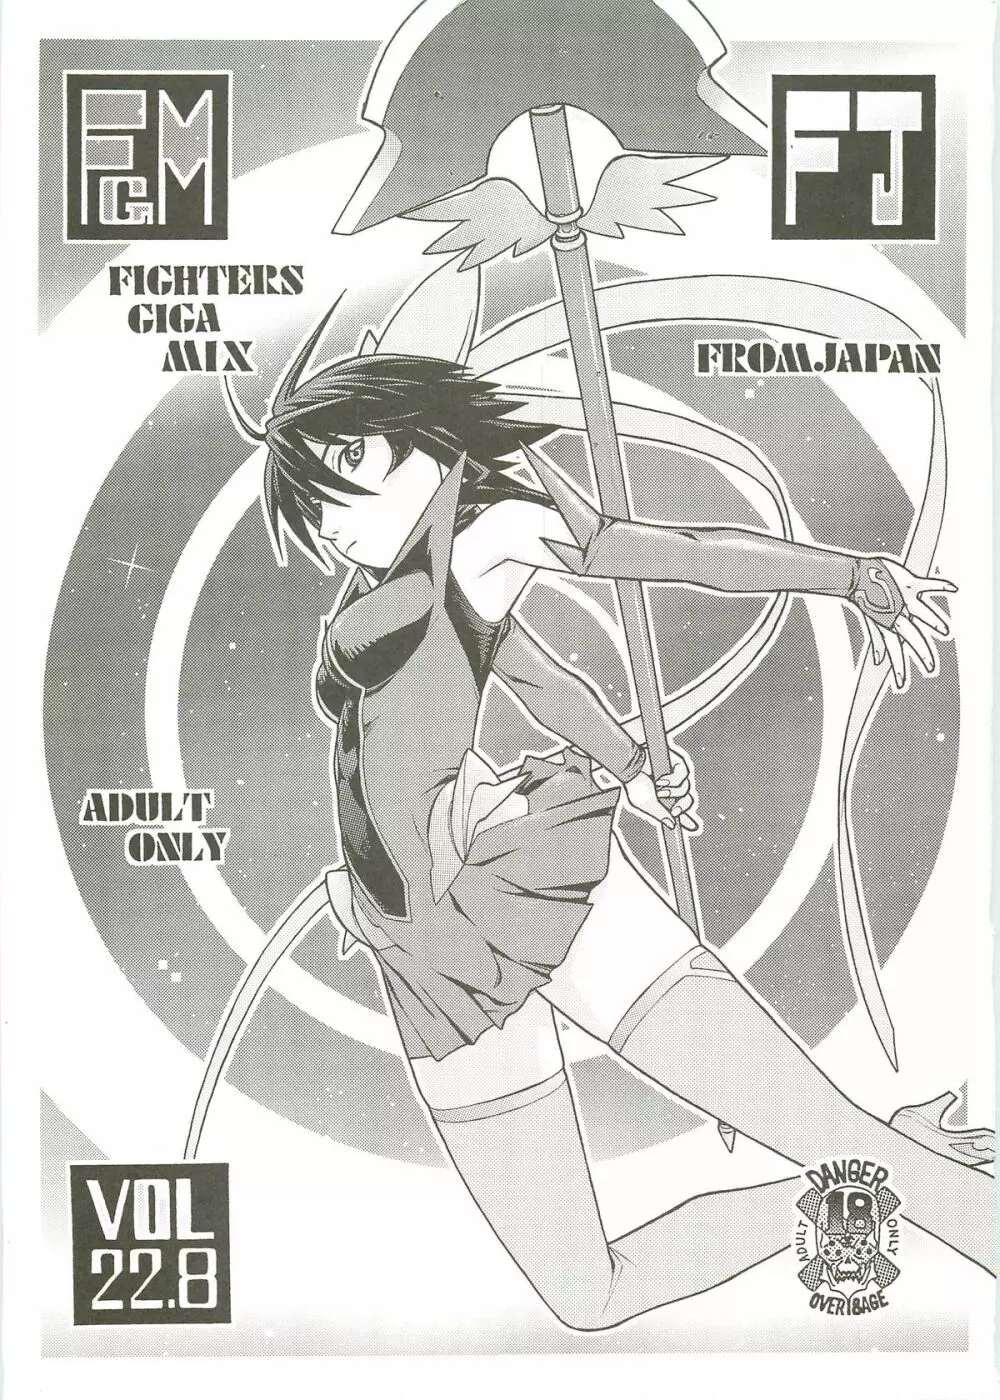 FIGHTERS GIGAMIX Vol.22.8